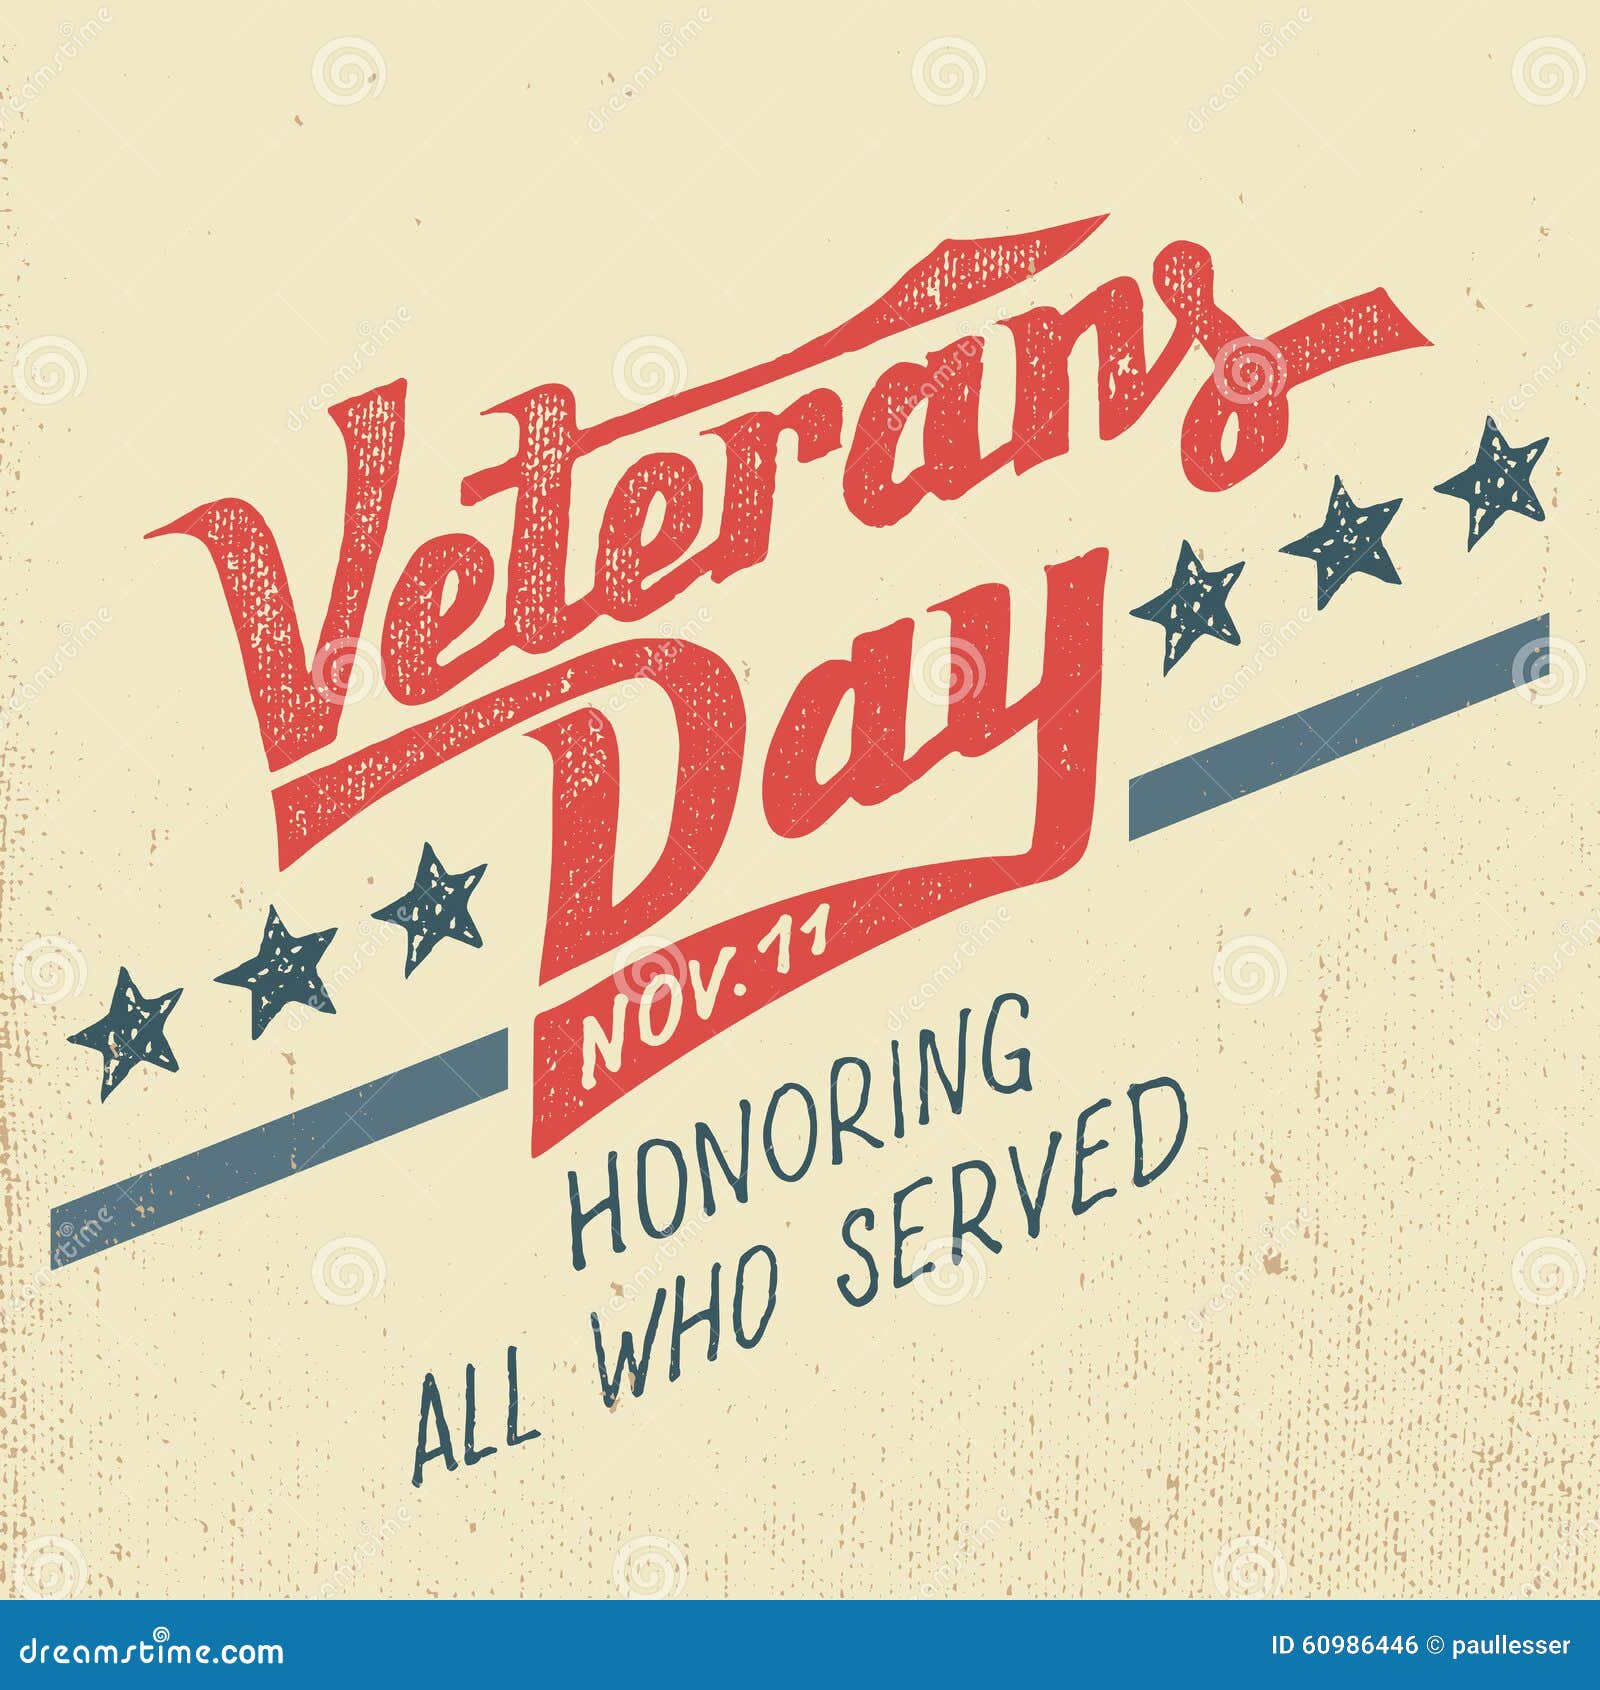 Veterans Day Holiday Typographic Design Stock Vector  Image: 60986446